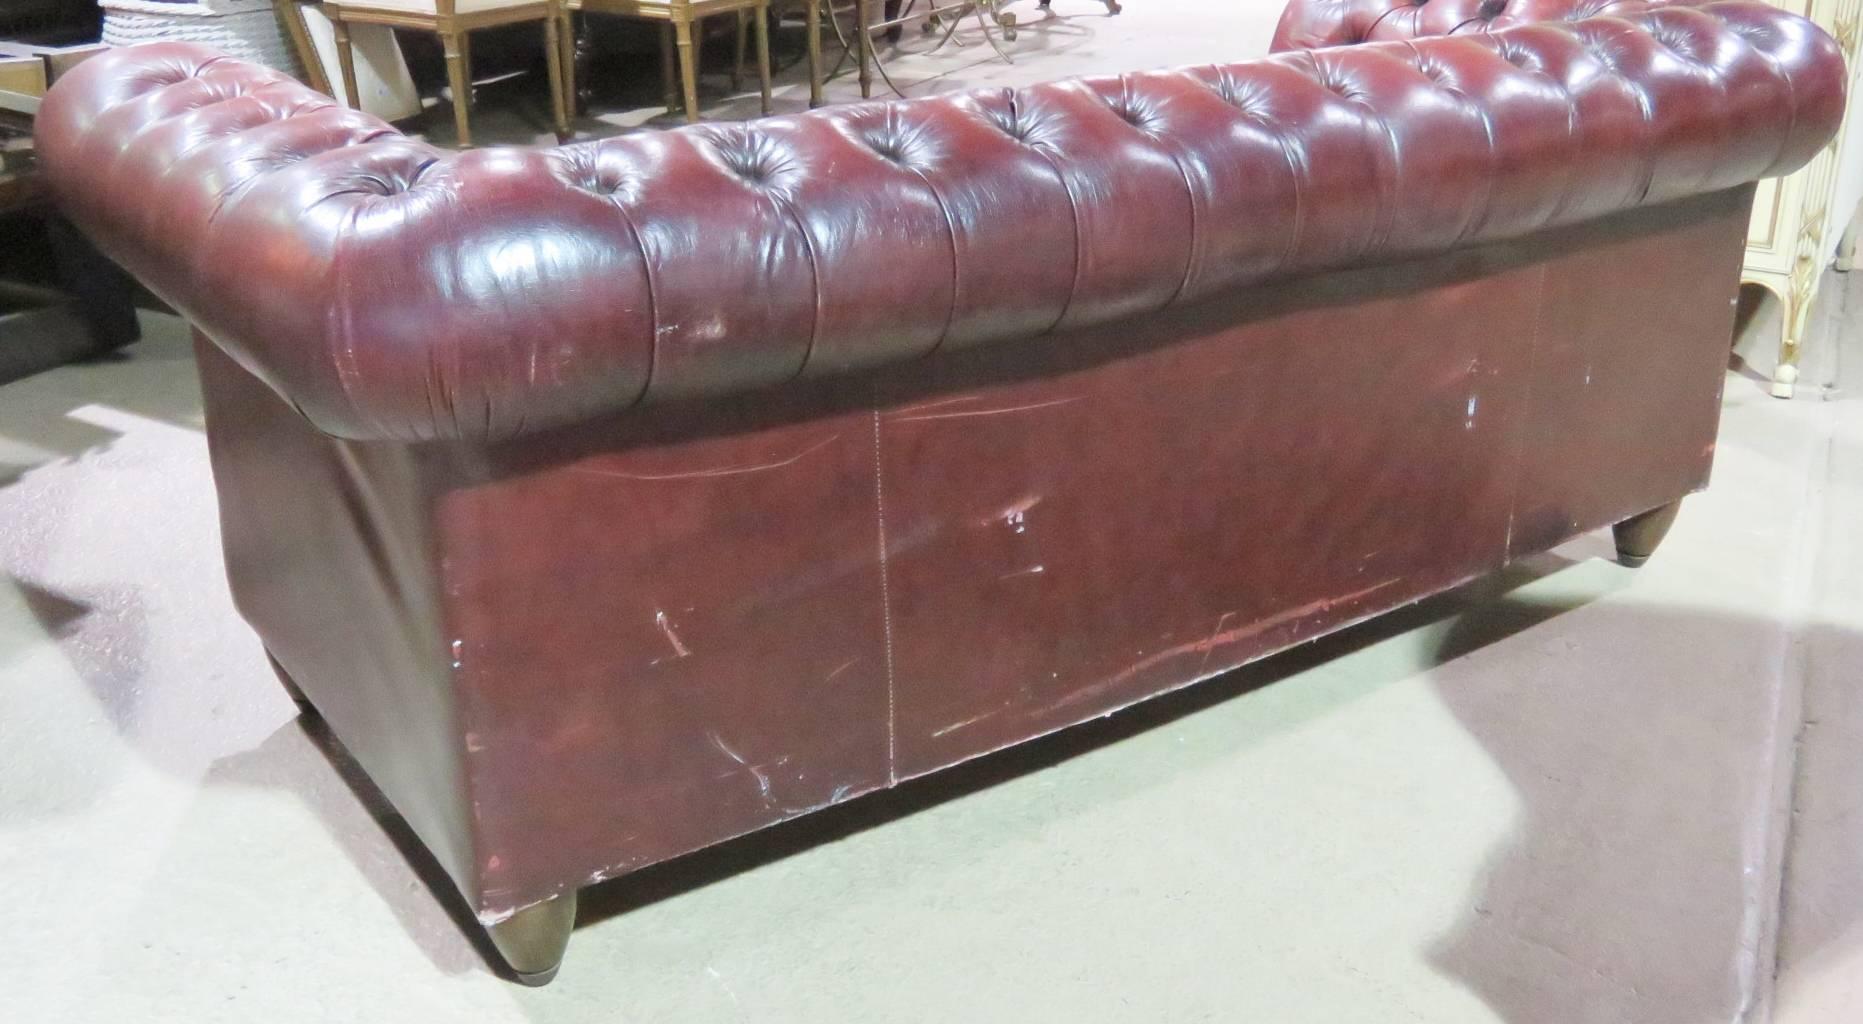 Red leather tufted upholstery. Wood legs with tacked frame.